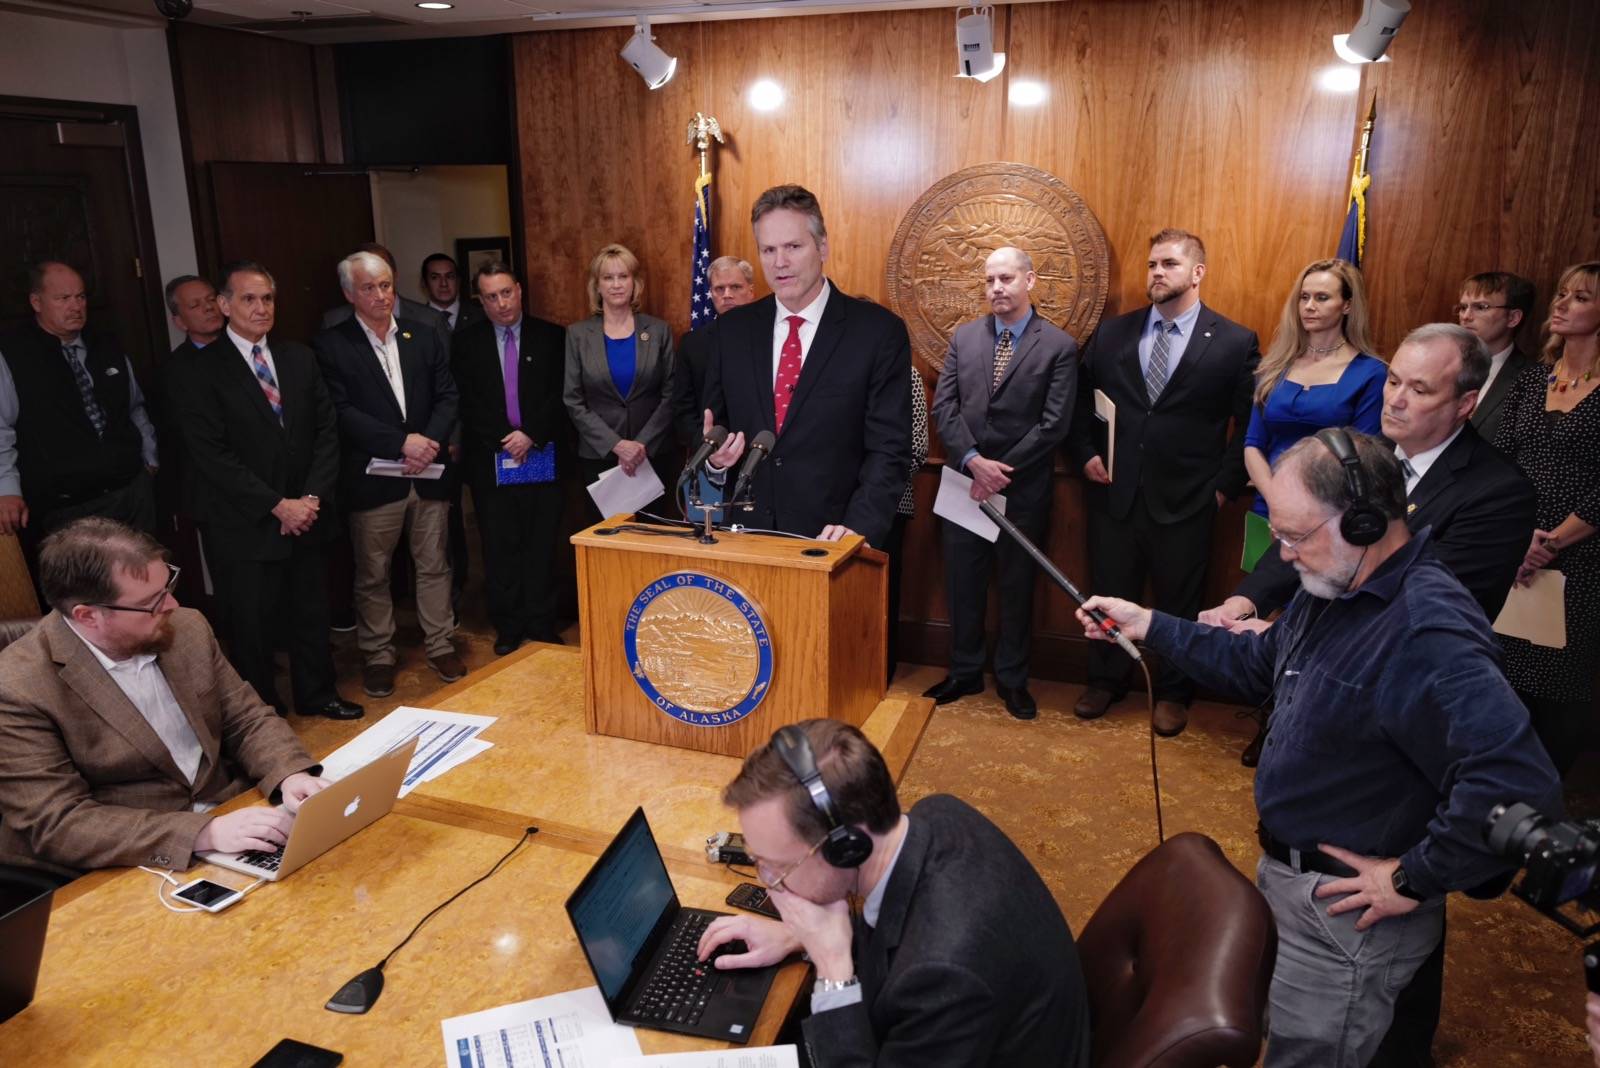 Gov. Mike Dunleavy, surrounded by his cabinet members, announces his state budget during a press conference at the Capitol on Wednesday, Dec. 11, 2019. (Michael Penn | Juneau Empire)